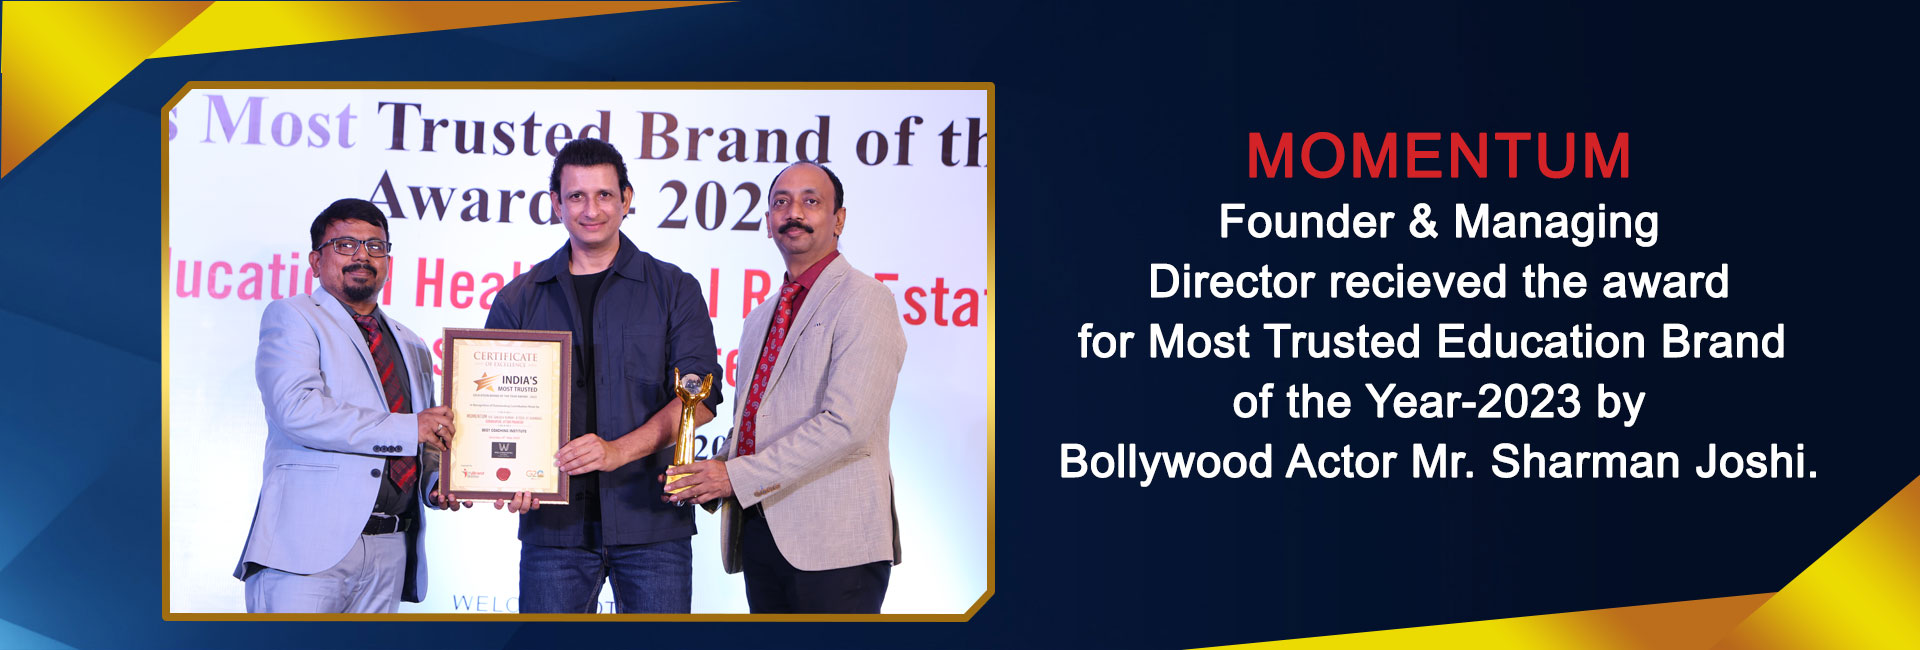 Founder & Managing Director recieved the award for Most Trusted Education Brand  of the Year-2023 by Bollywood Actor Mr. Sharman Joshi.